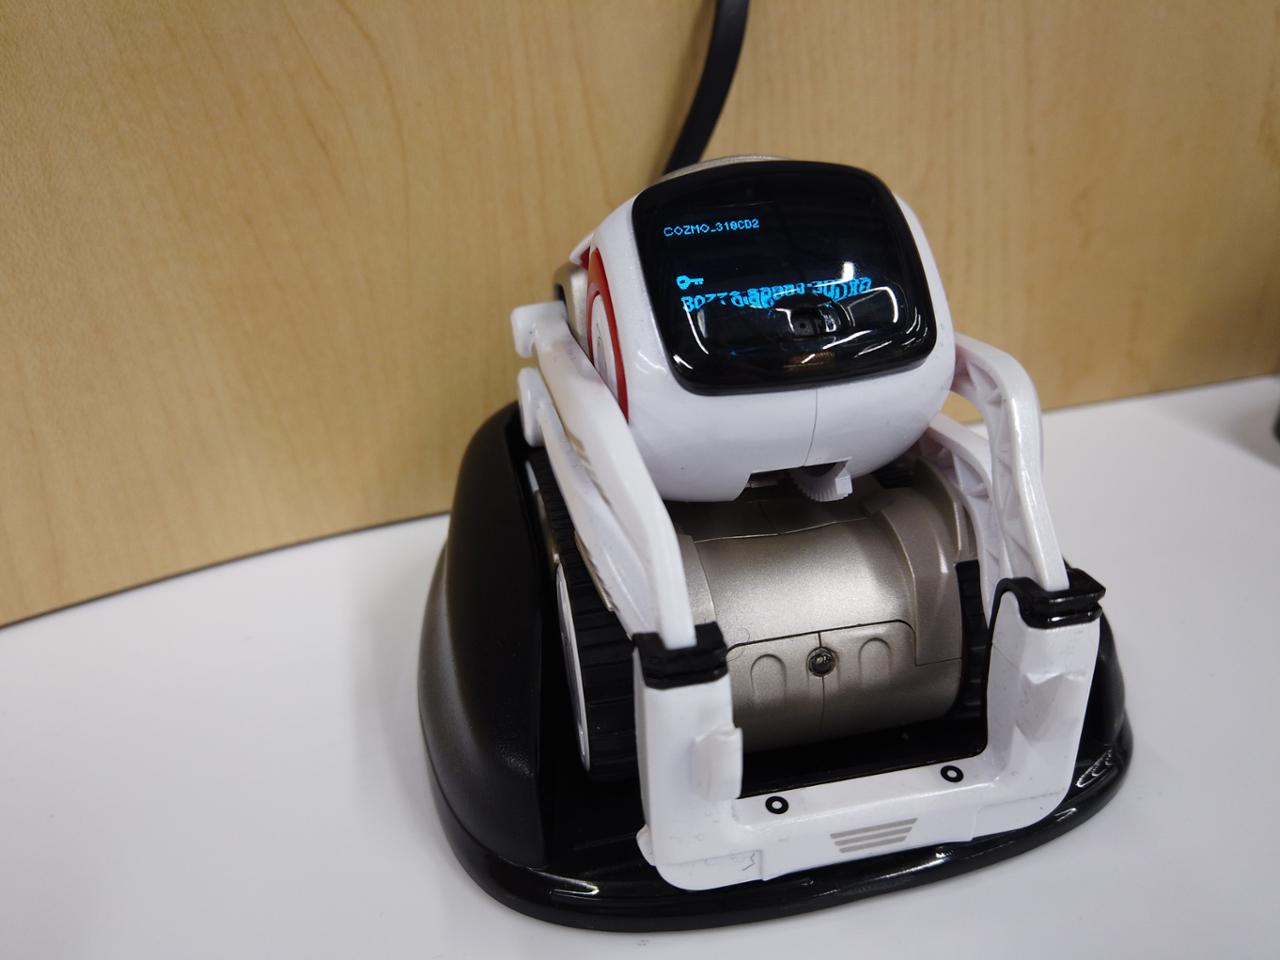 A small plastic tracked robot with a tilting display and camera.